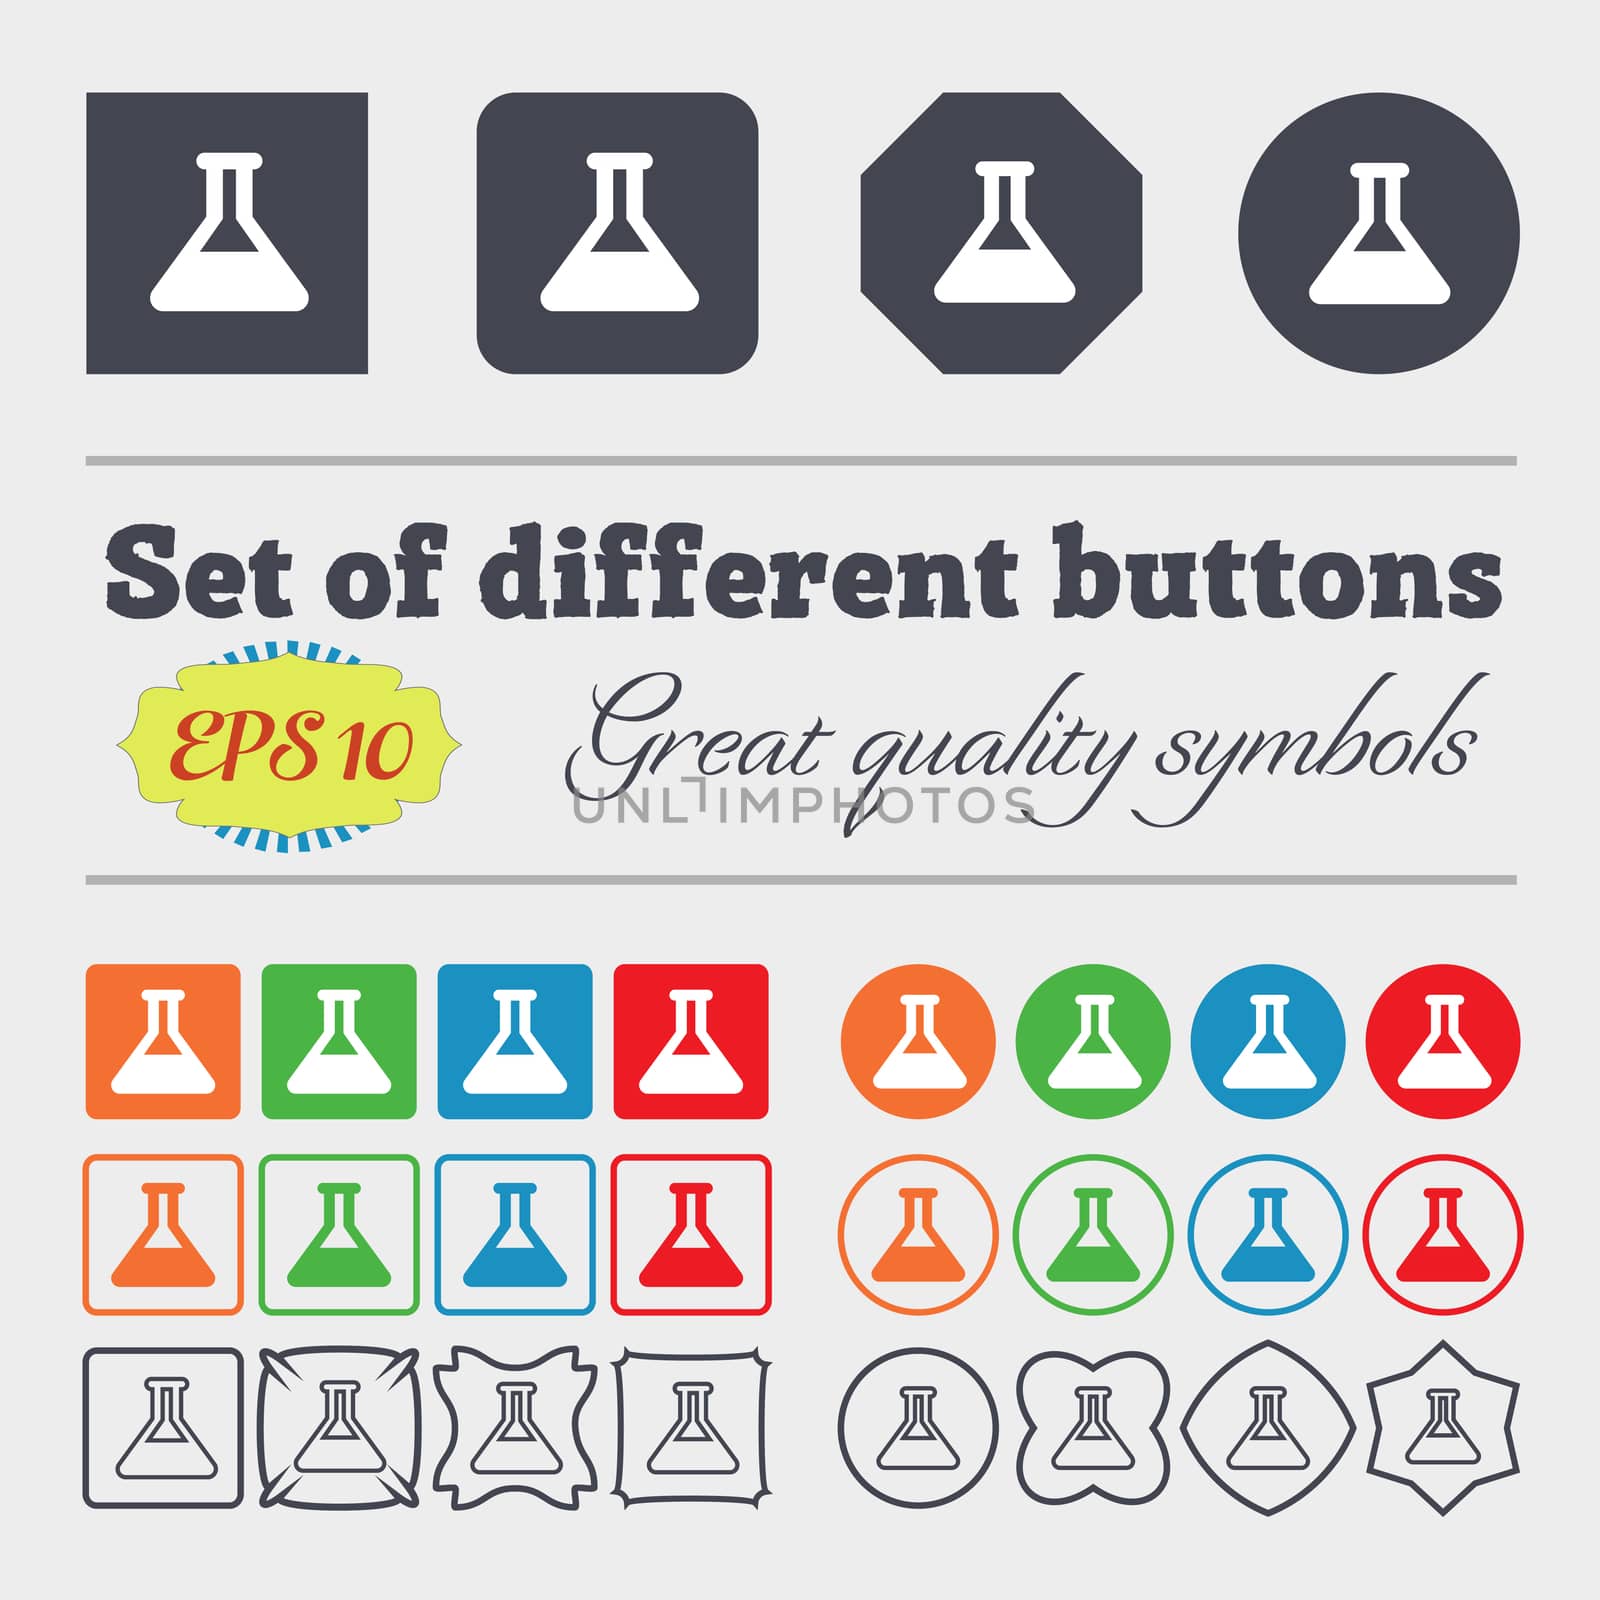 Conical Flask icon sign. Big set of colorful, diverse, high-quality buttons. illustration